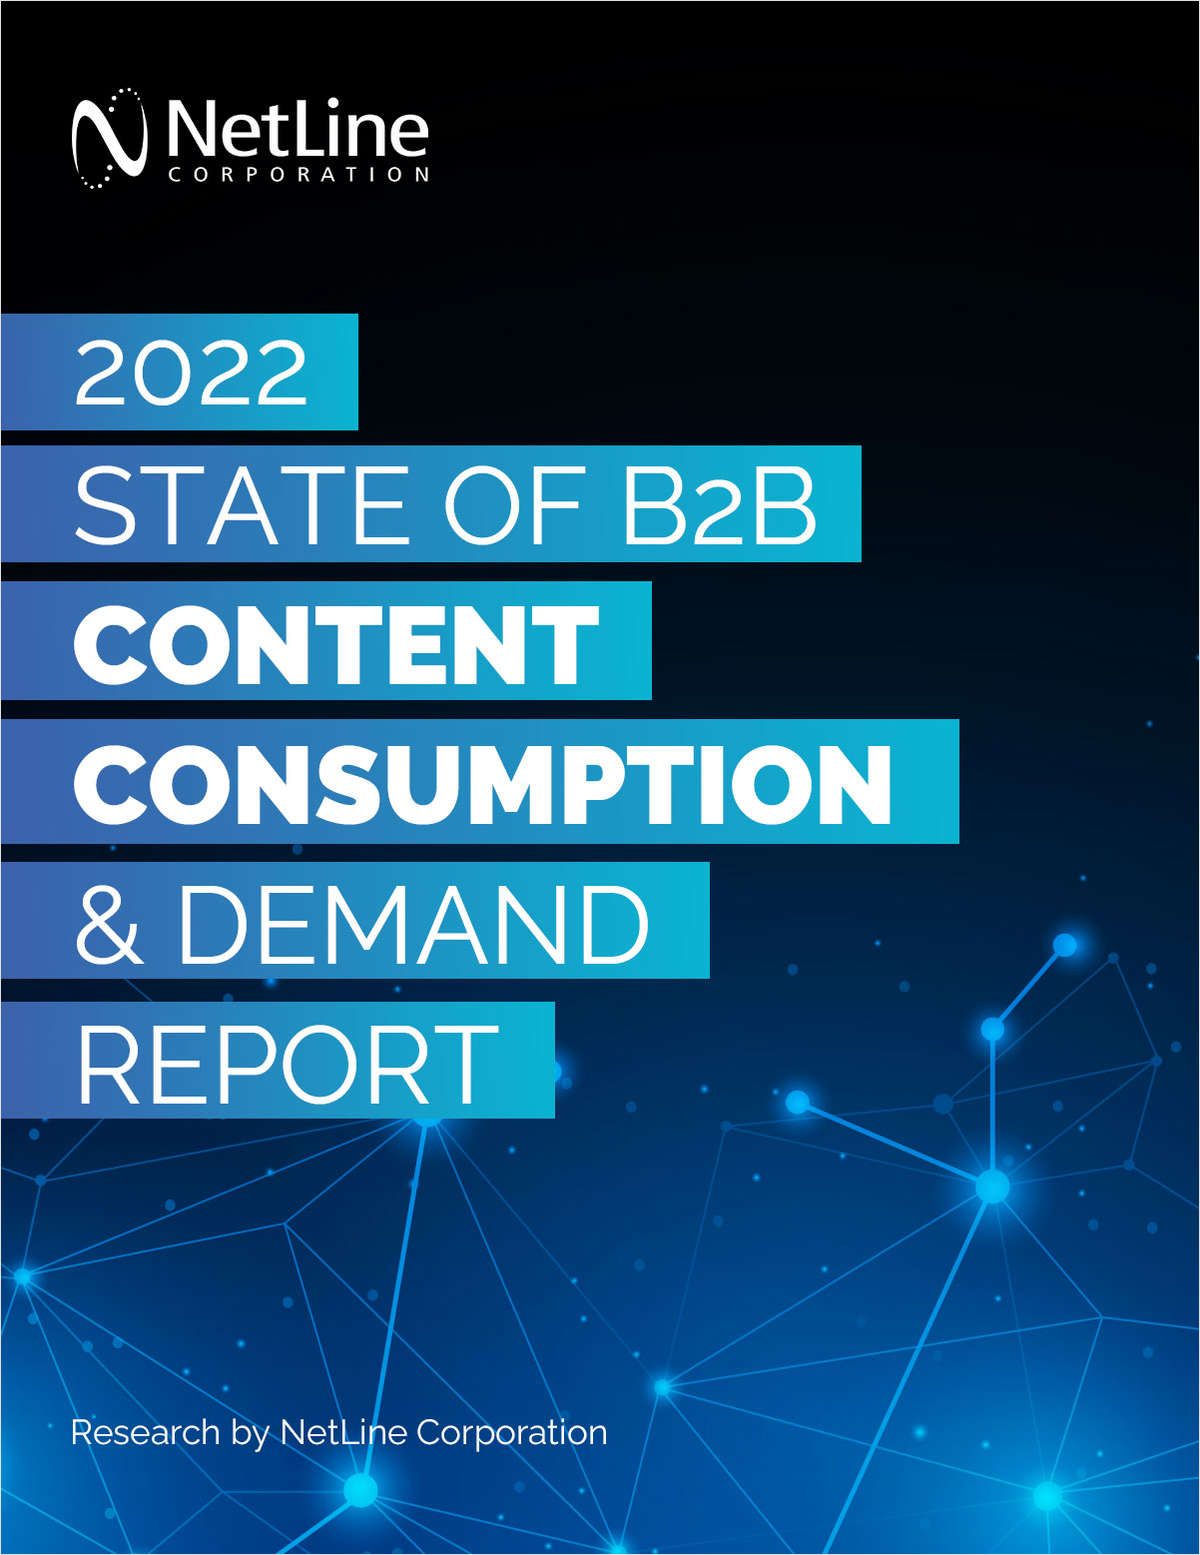 2022 State of B2B Content Consumption and Demand Report for Marketers